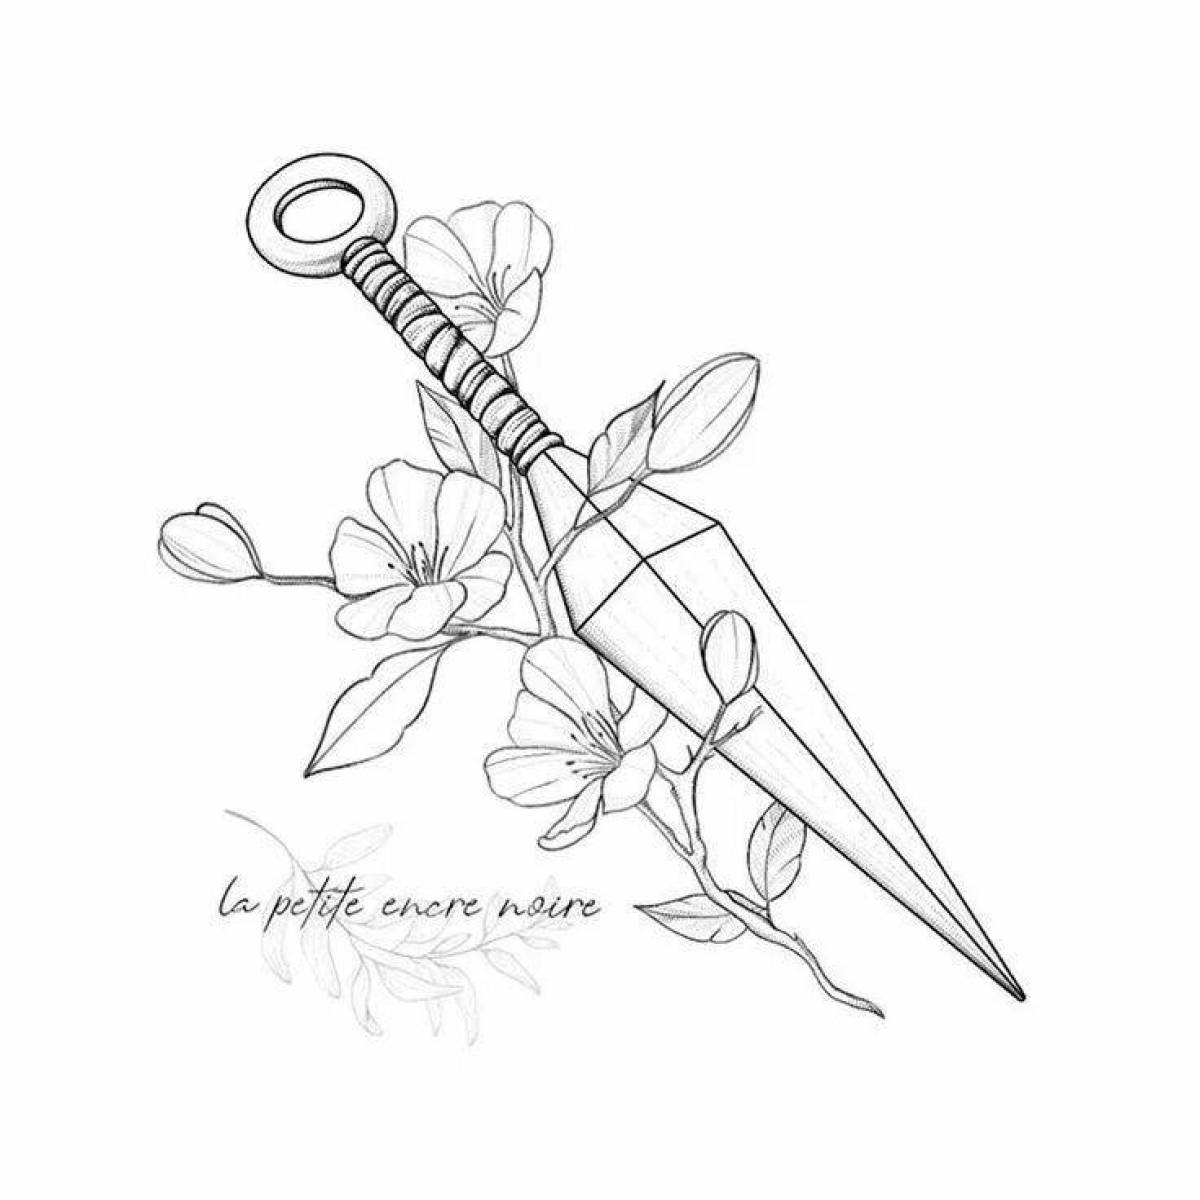 Exquisite kunai knife coloring page